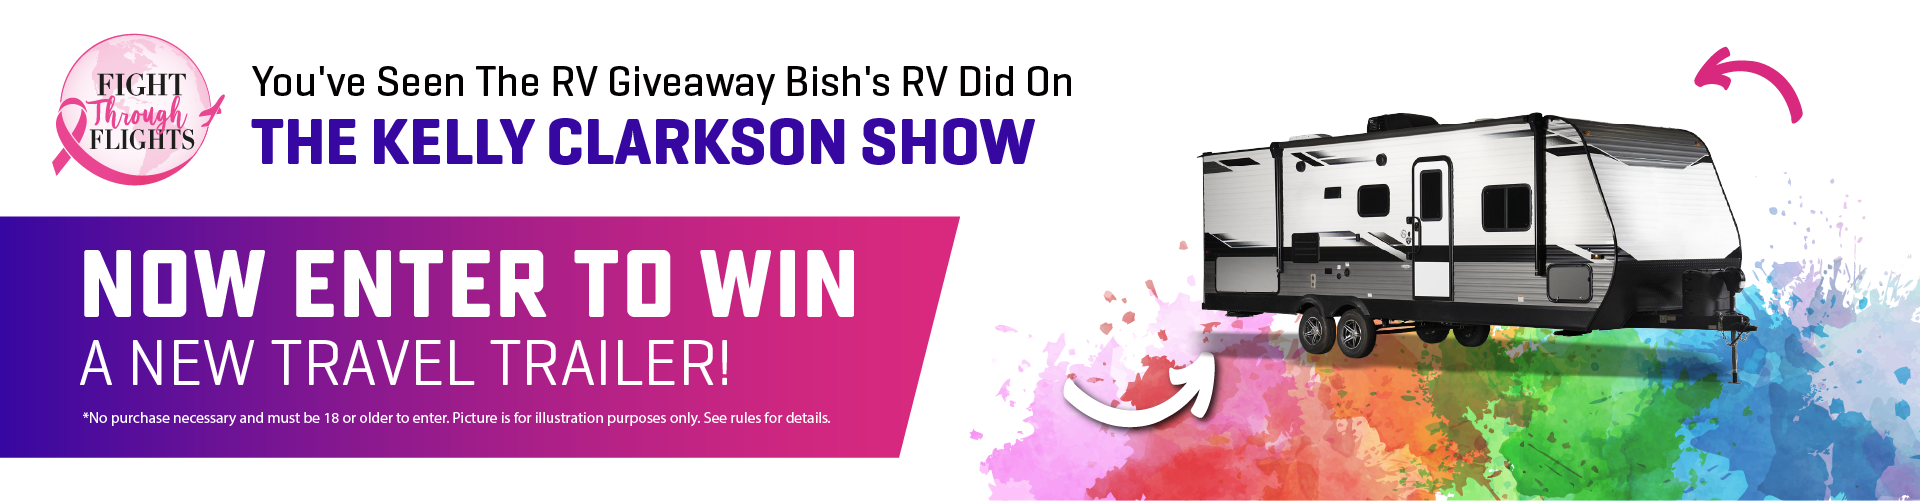 The Kelly Clarkson Show RV Giveaway